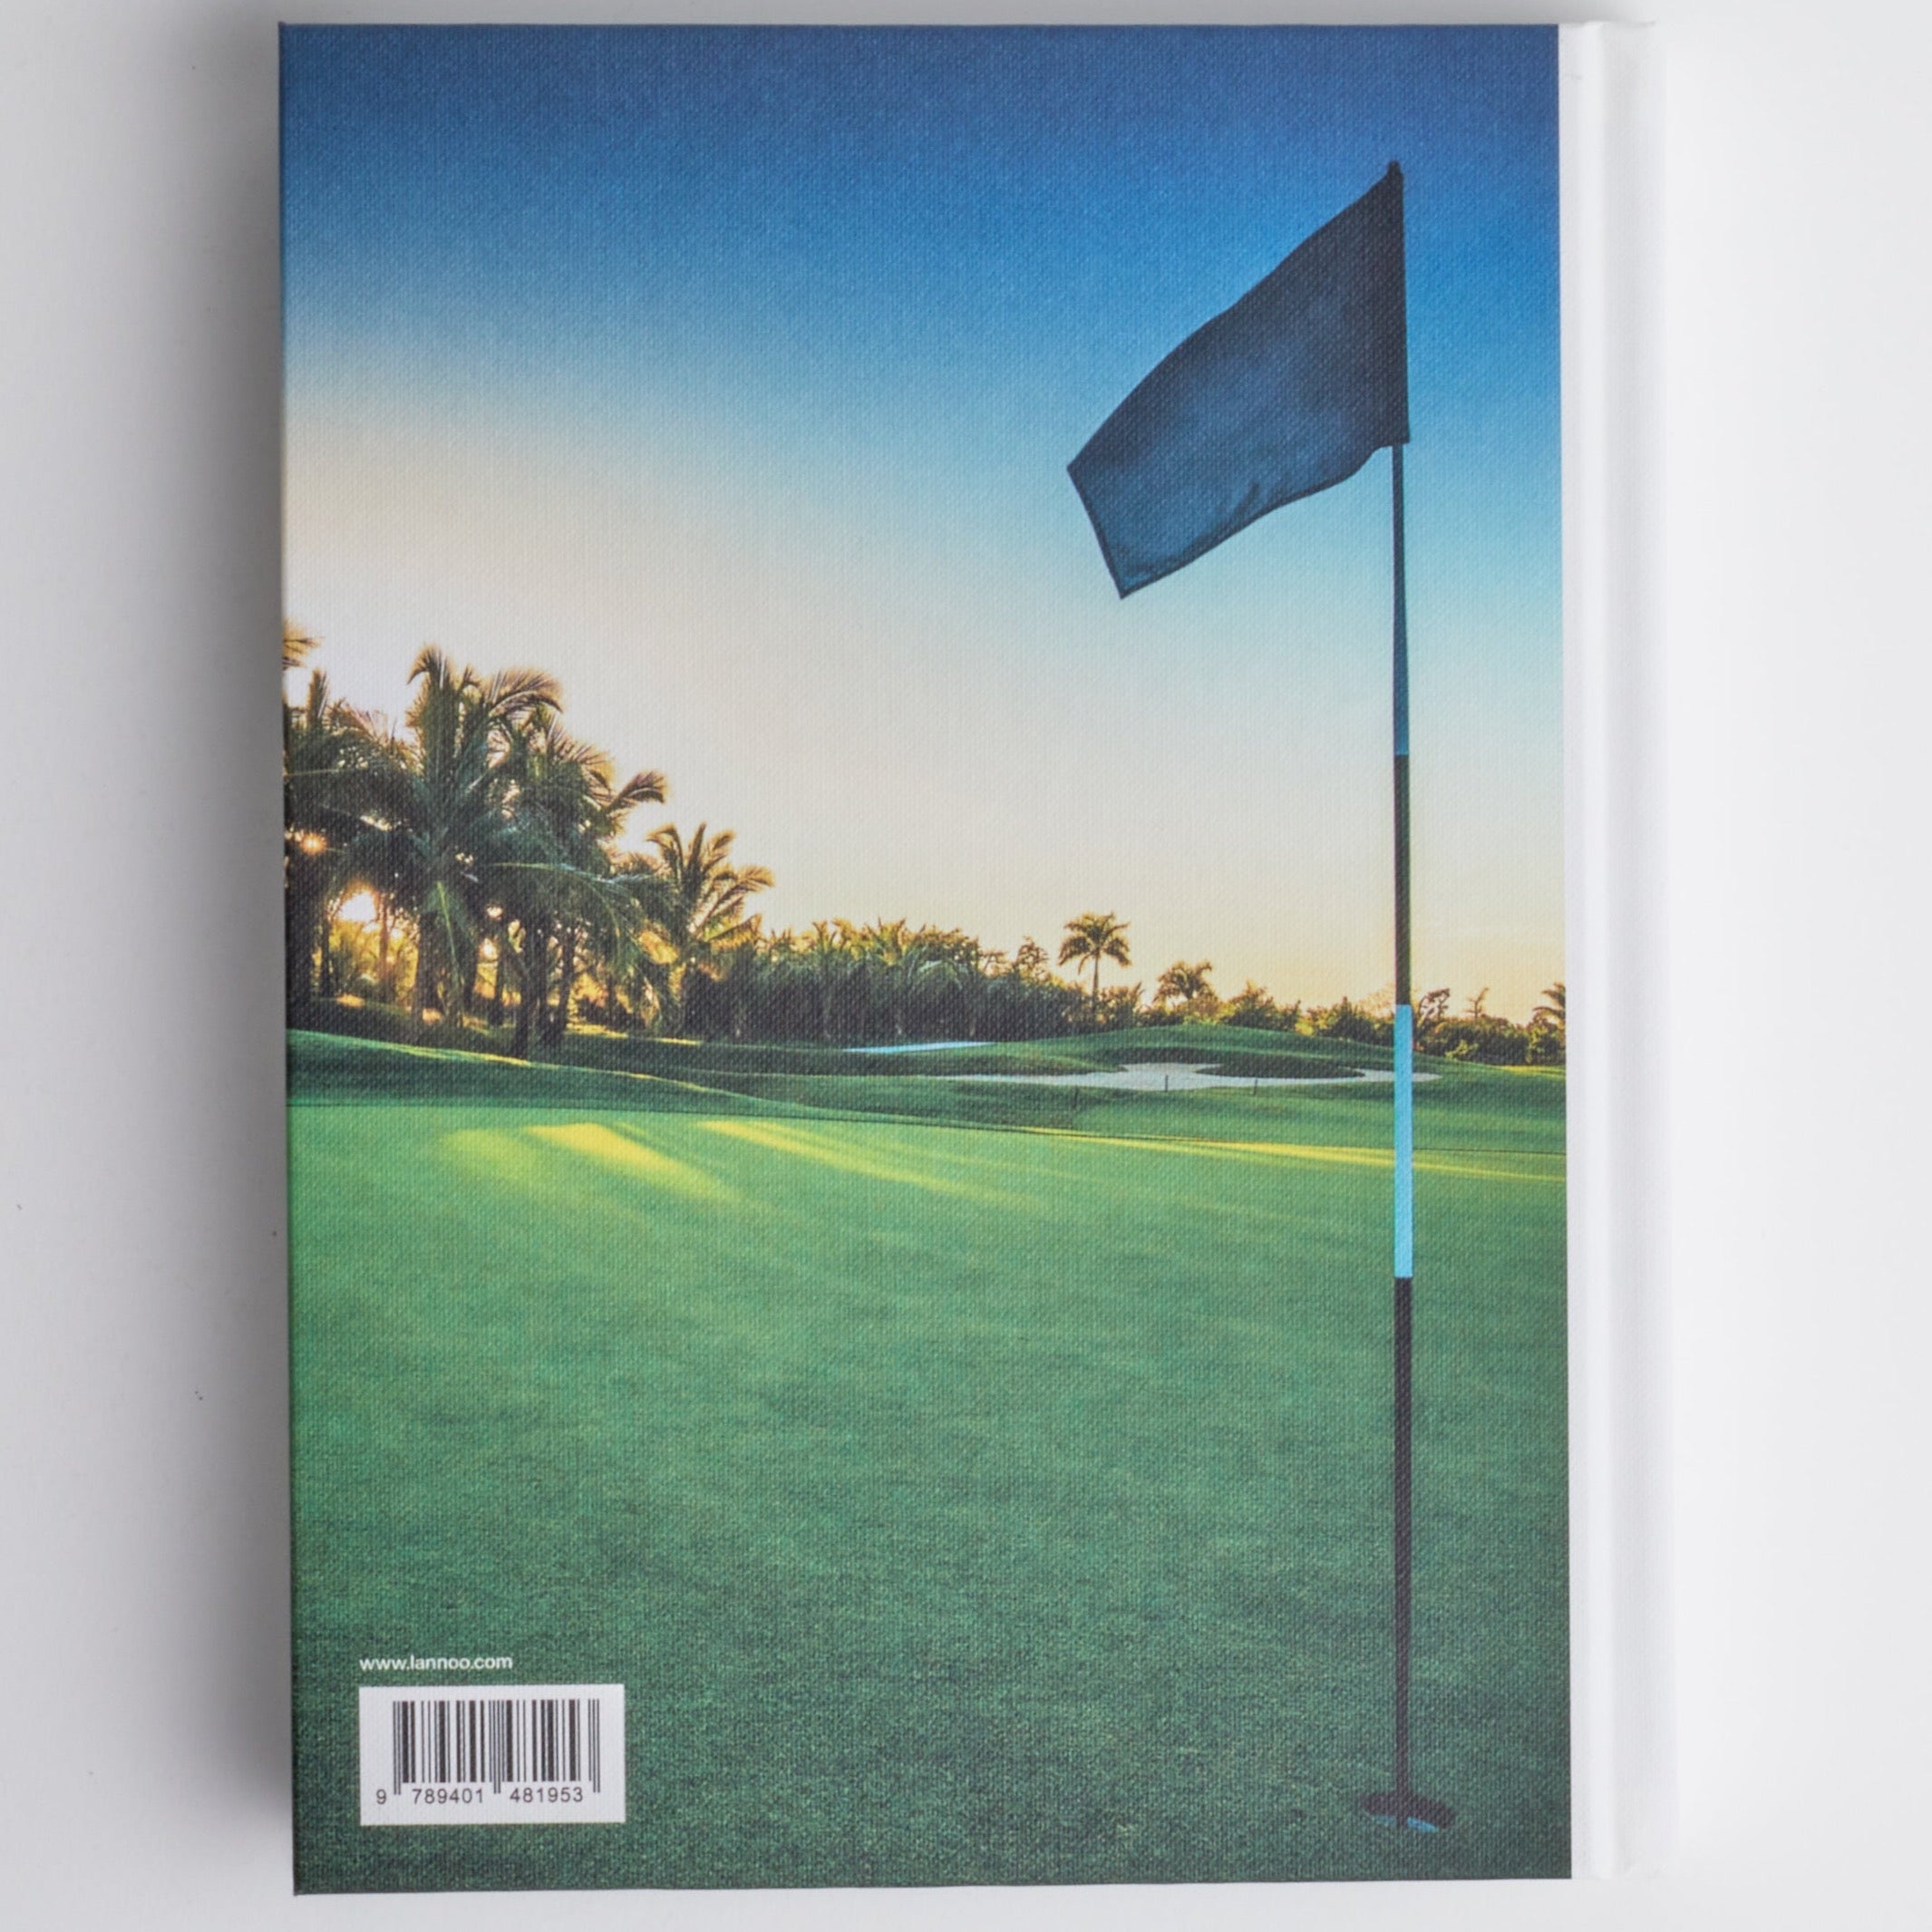 150 Golf Courses You Need to Visit Before You Die back cover